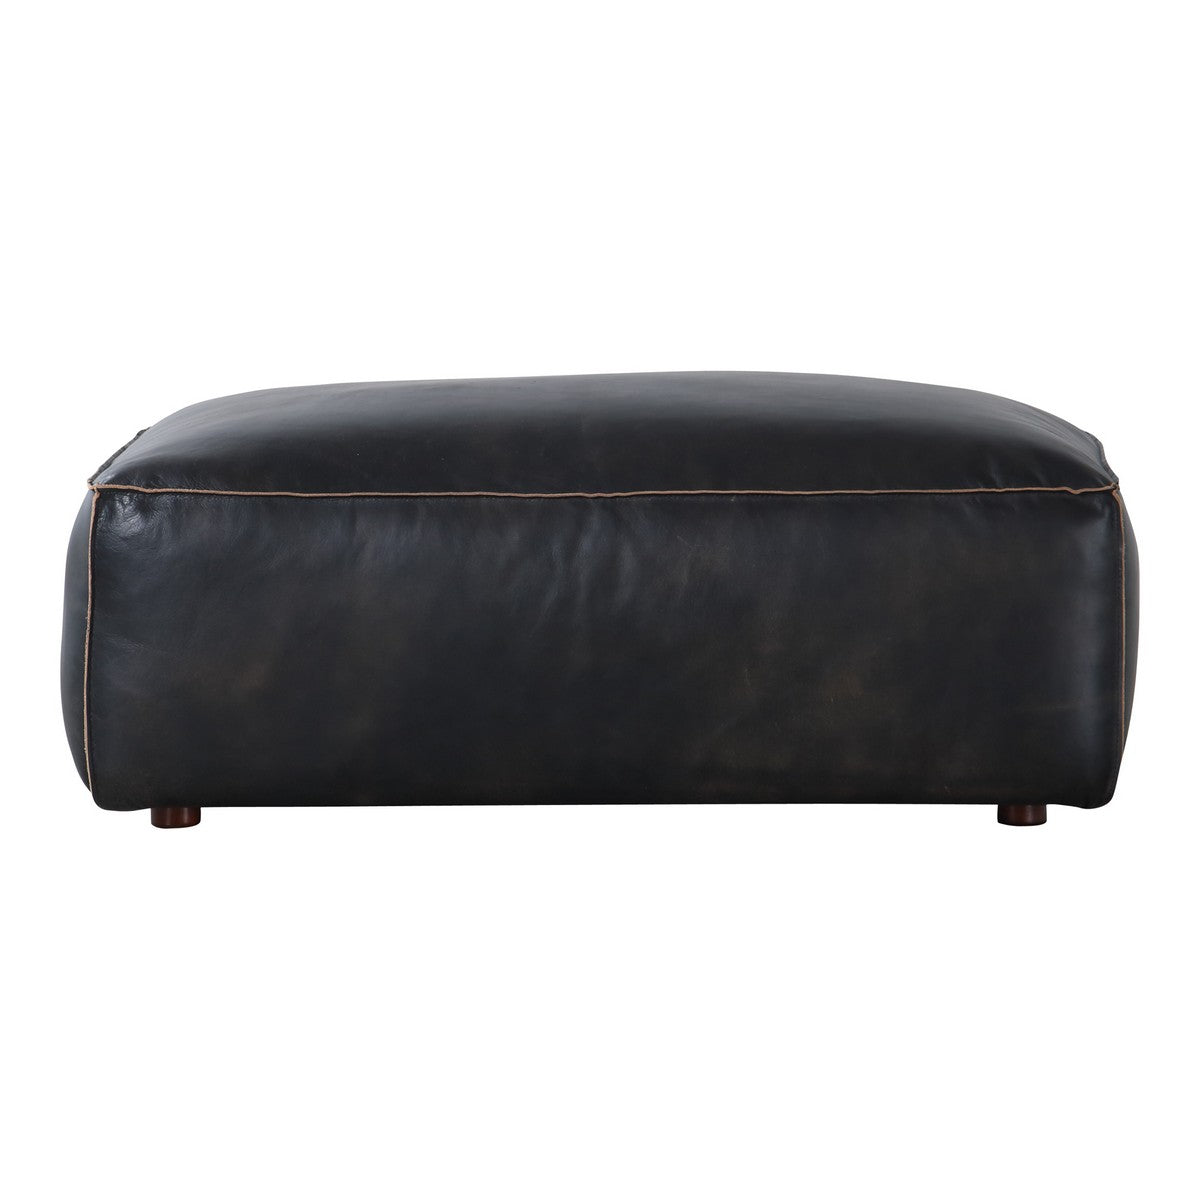 Moe's Home Collection Luxe Ottoman Antique Black - QN-1020-01 - Moe's Home Collection - Ottomans - Minimal And Modern - 1